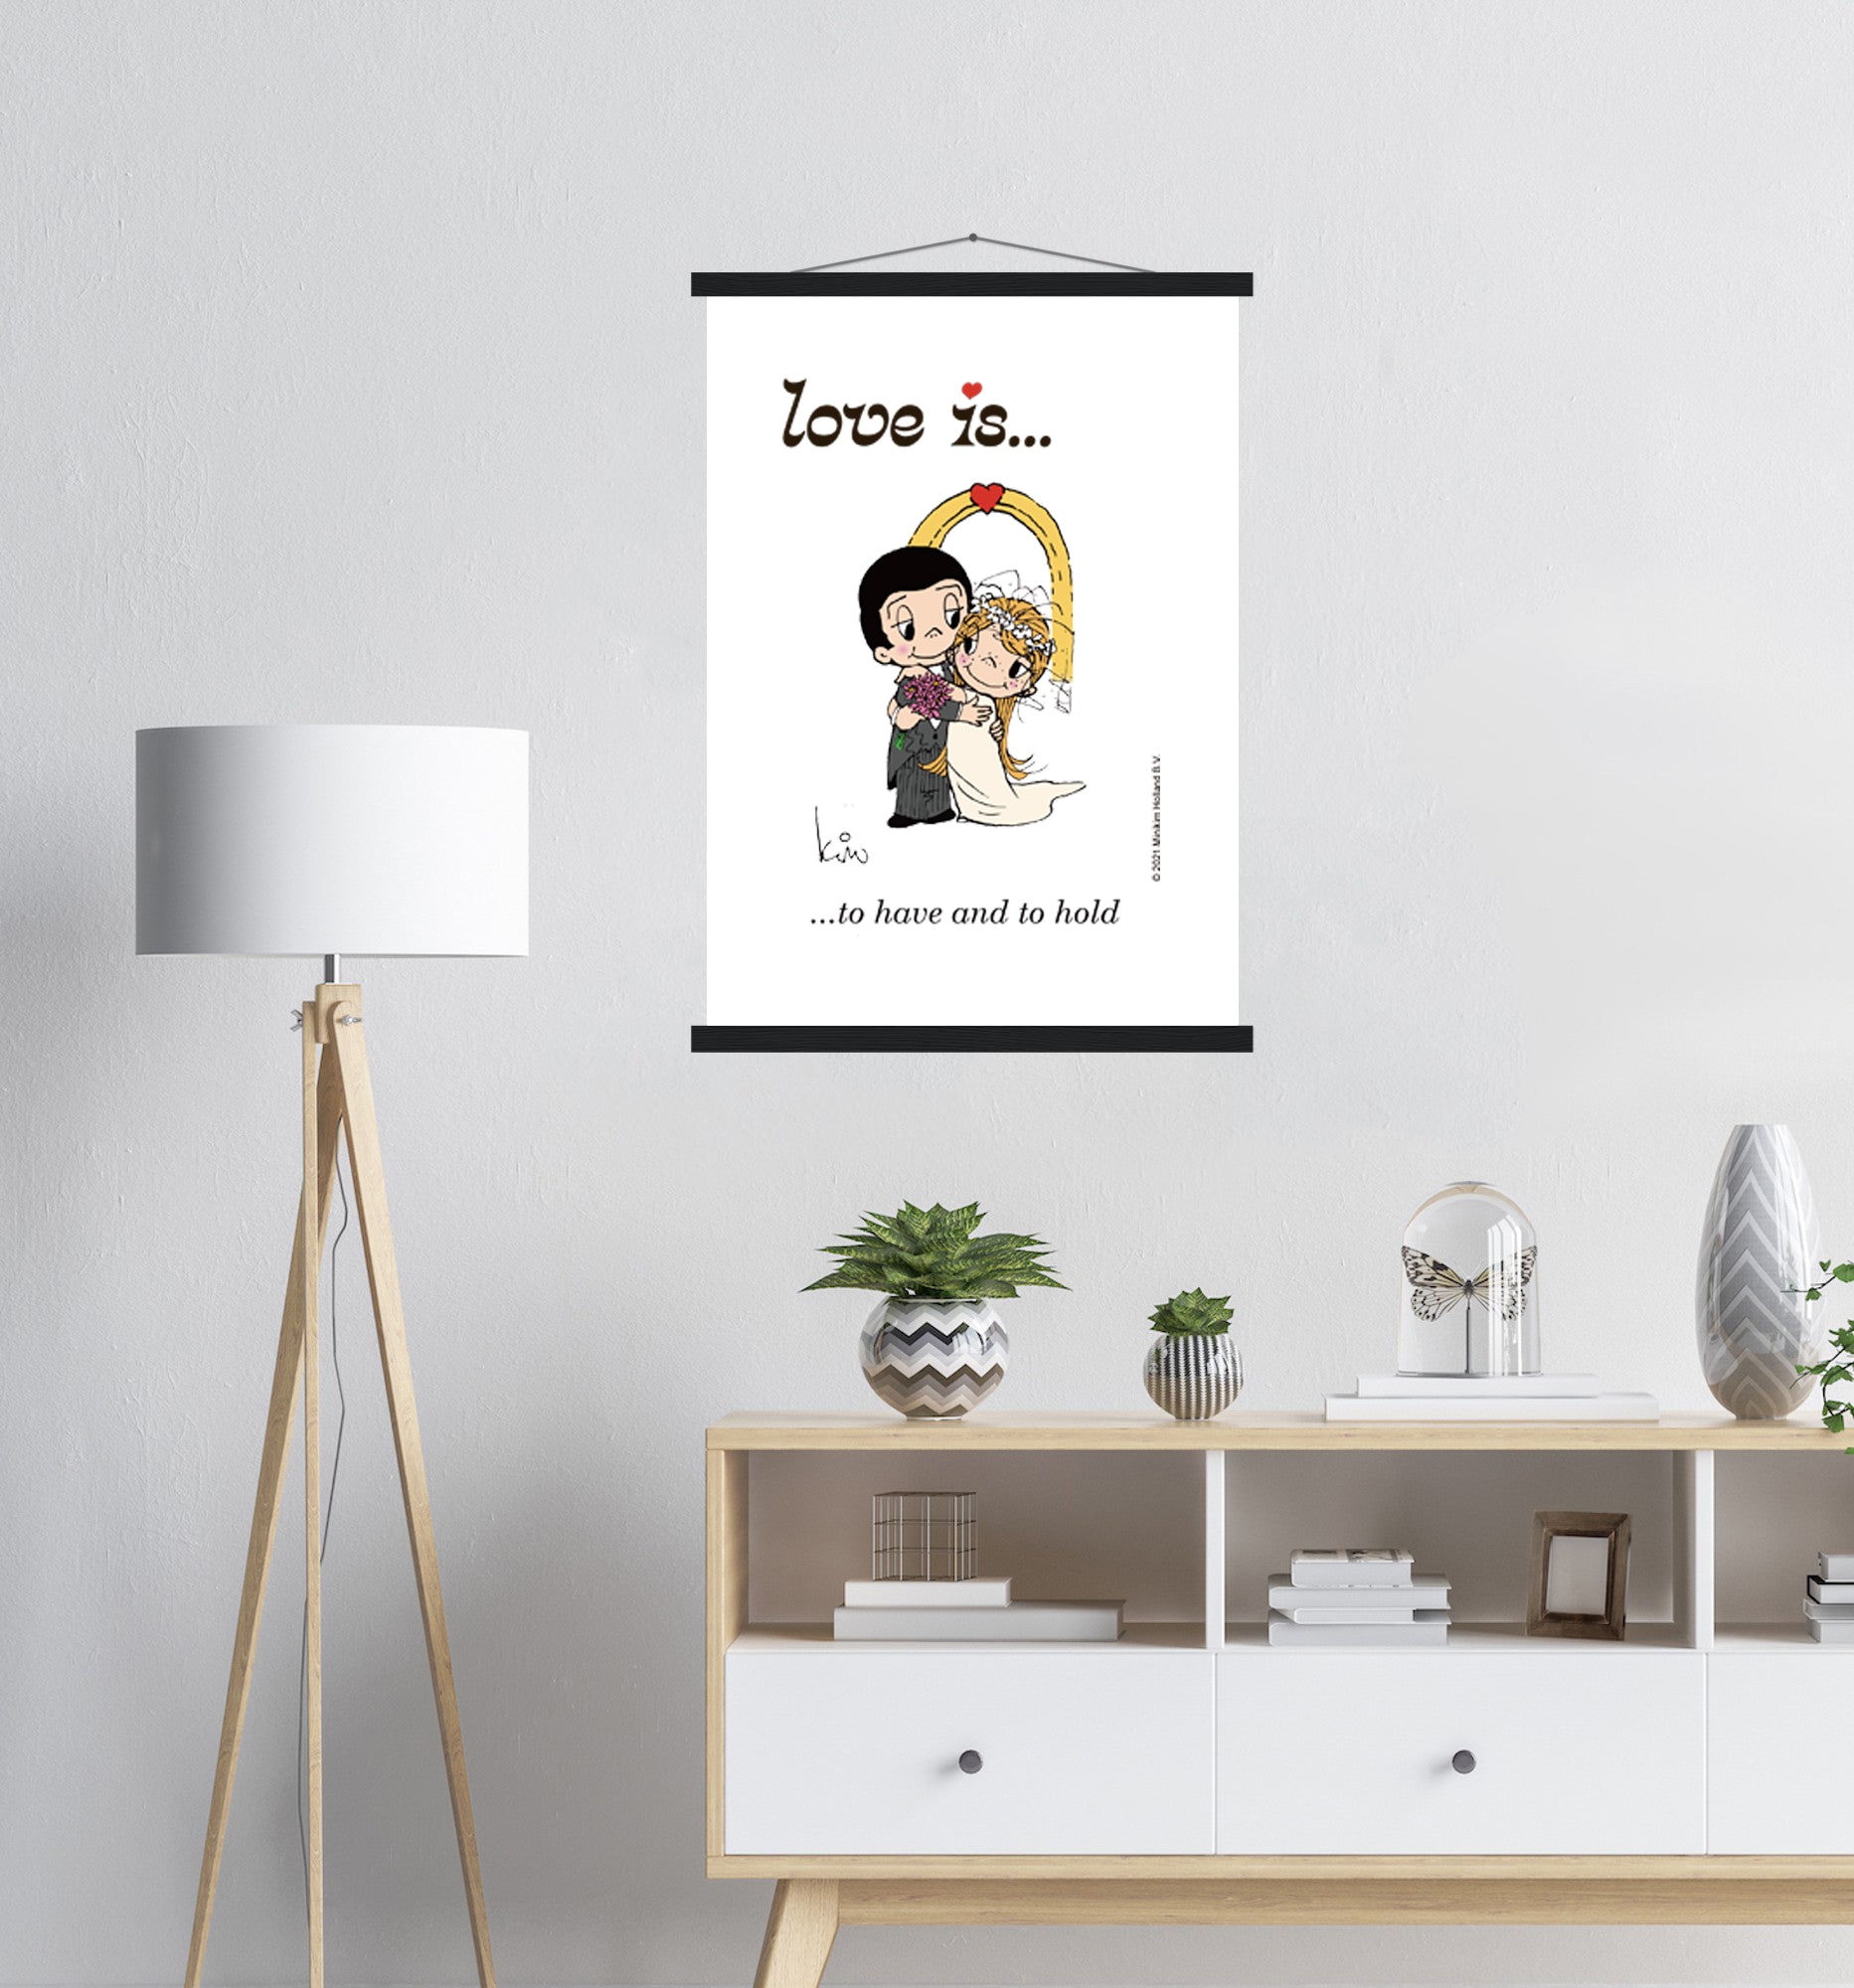 LOVE IS... TO HAVE AND TO HOLD WEDDING ART PRINT